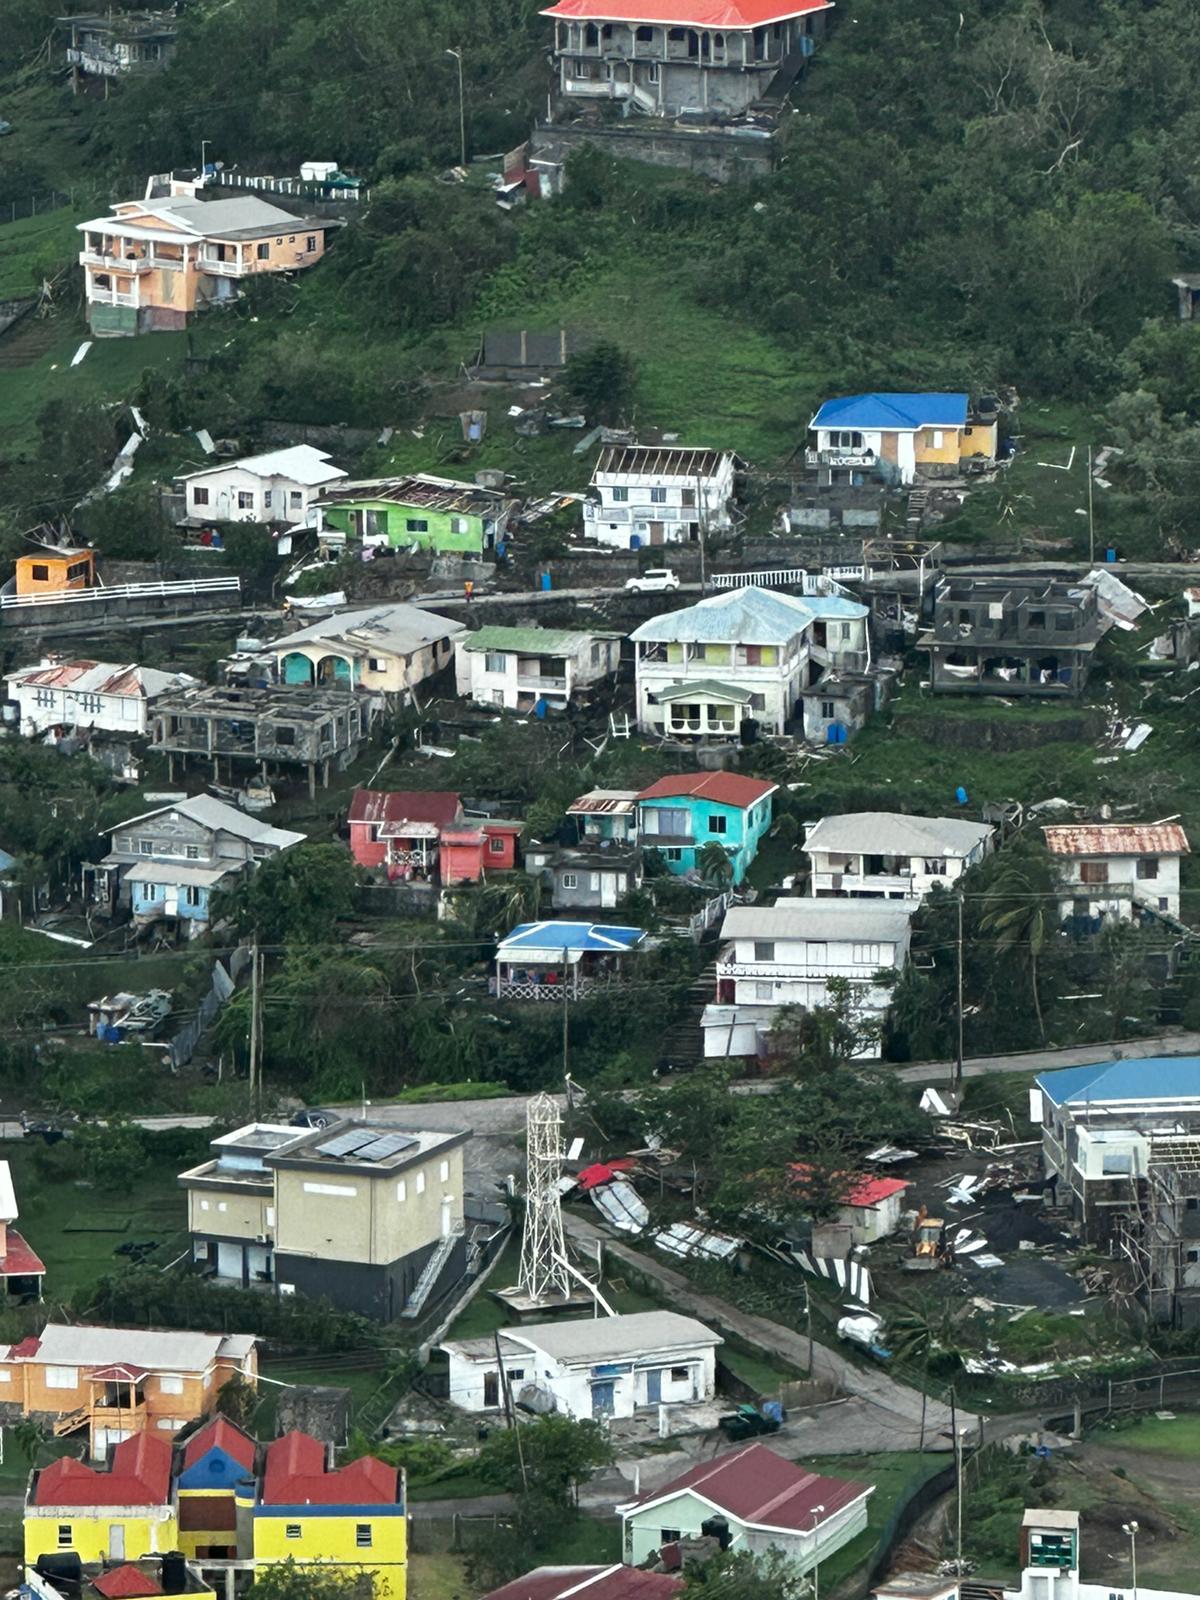 Hurricane Beryl destroyed several homes, pictured, on the island of Bequia